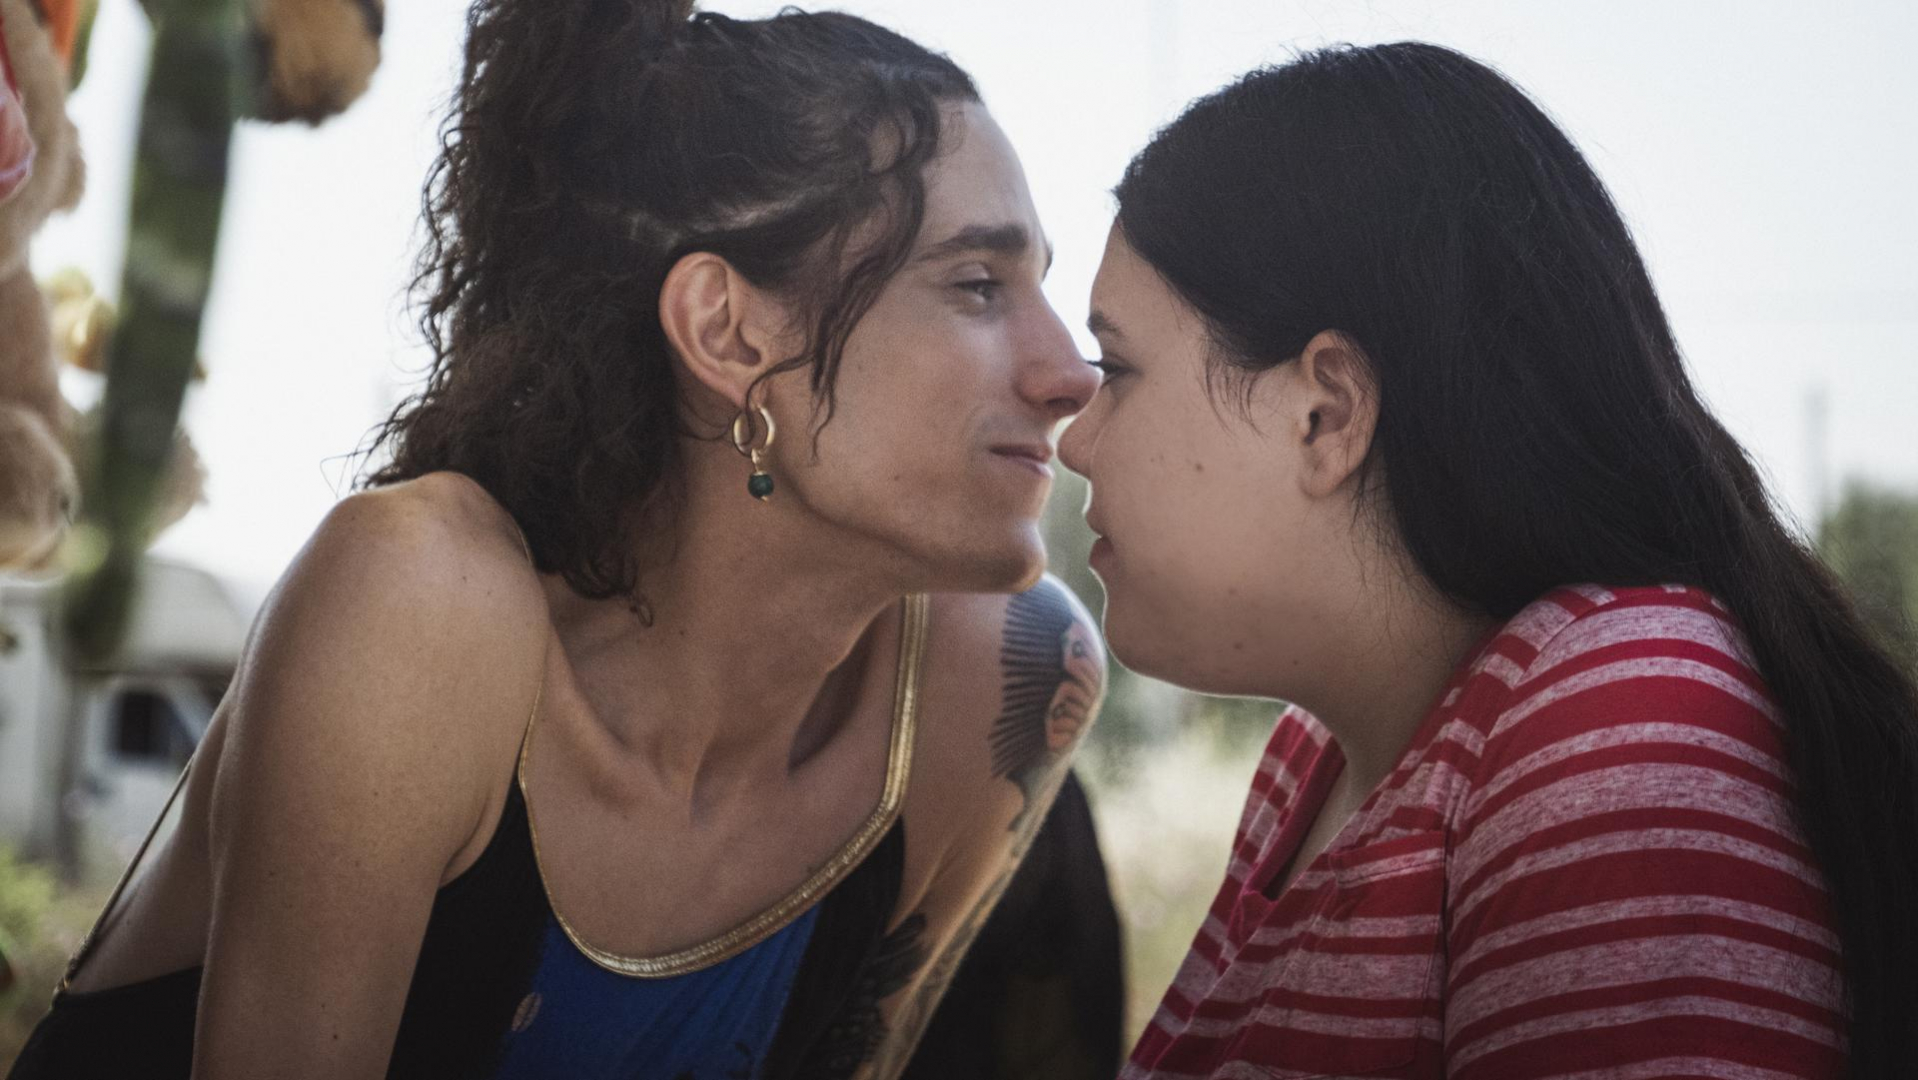 A still from Swing Ride. It shows the two main characters, a trans woman and a young fat girl, with their faces close to each other.